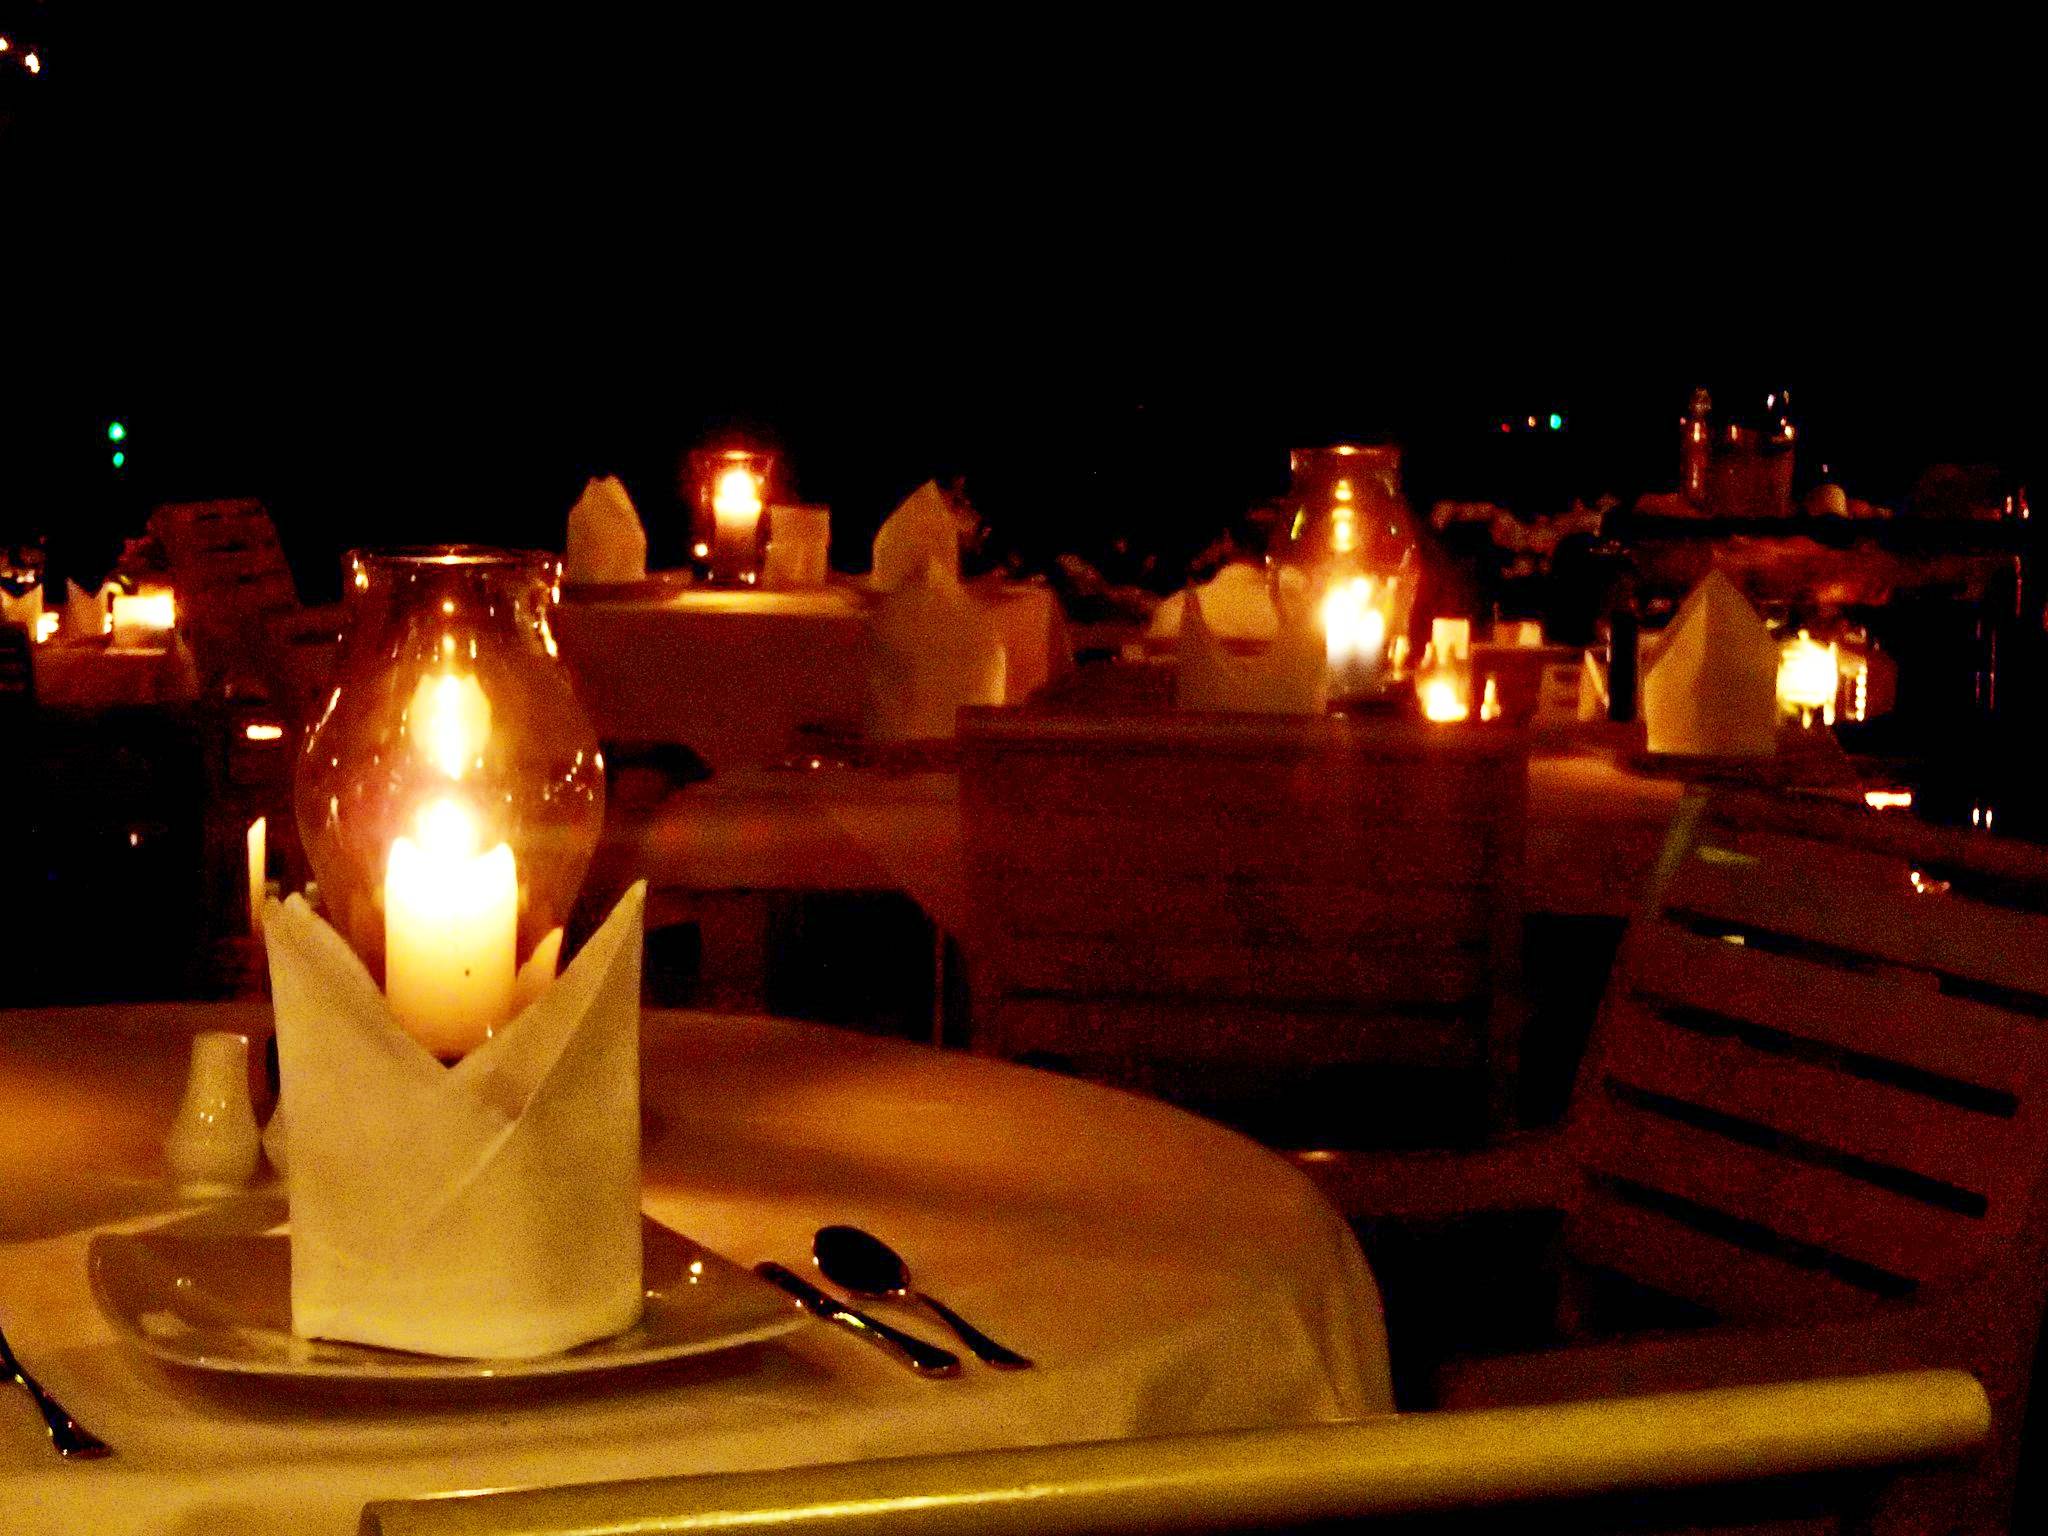 Candlelight dining at the beach